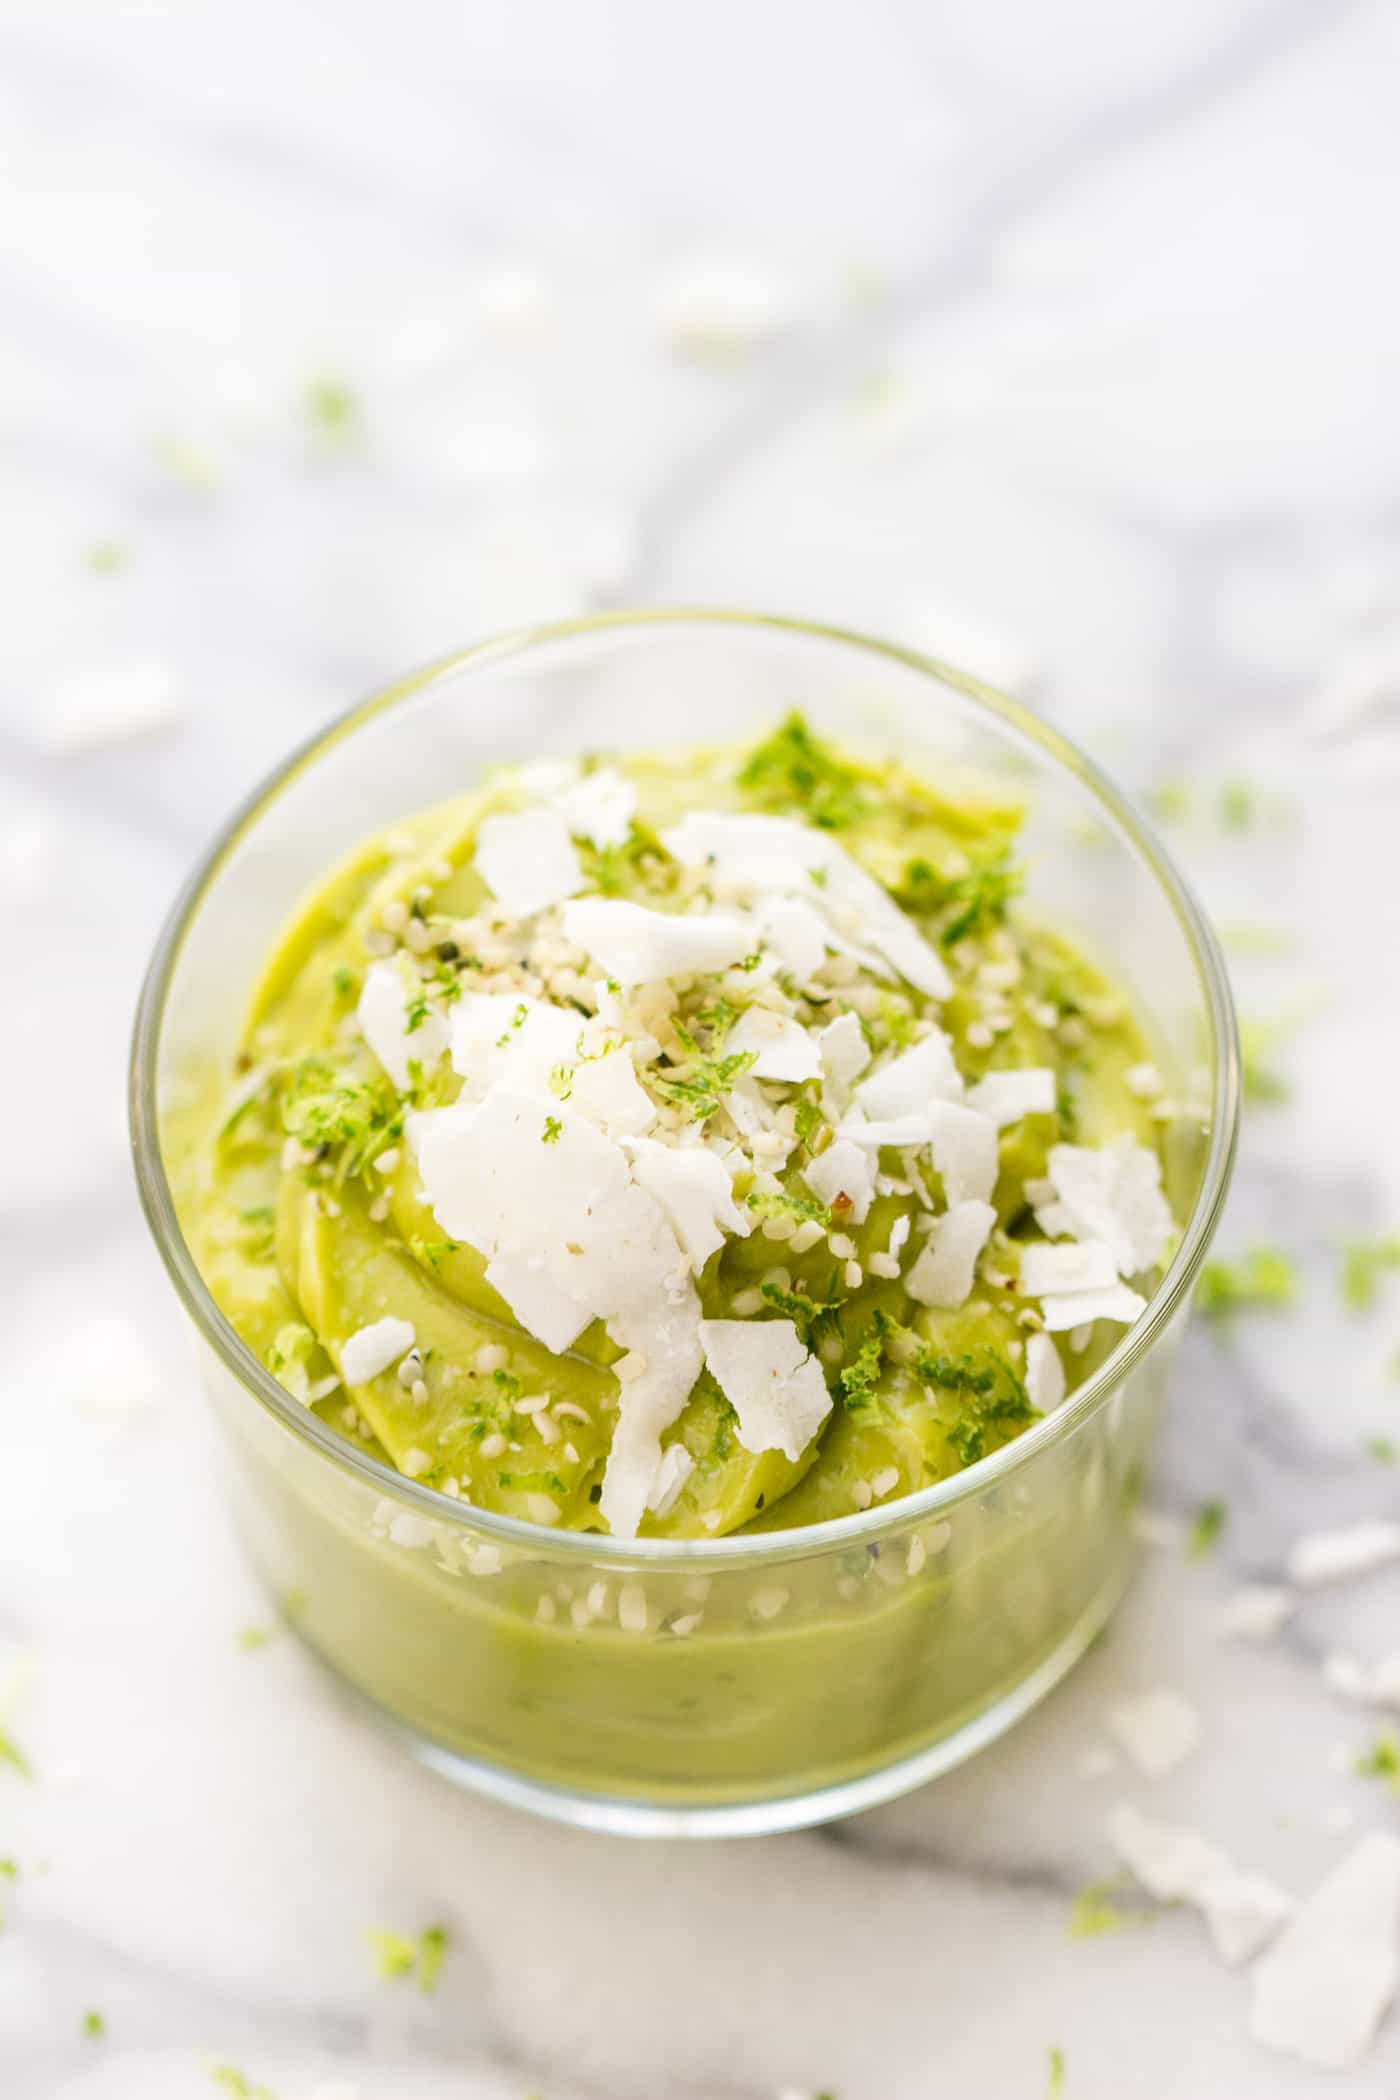 Key Lime Pie Avocado Mousse -- this tastes totally decadent and exactly like key lime pie, but uses only 3 ingredients and is SUPER HEALTHY!